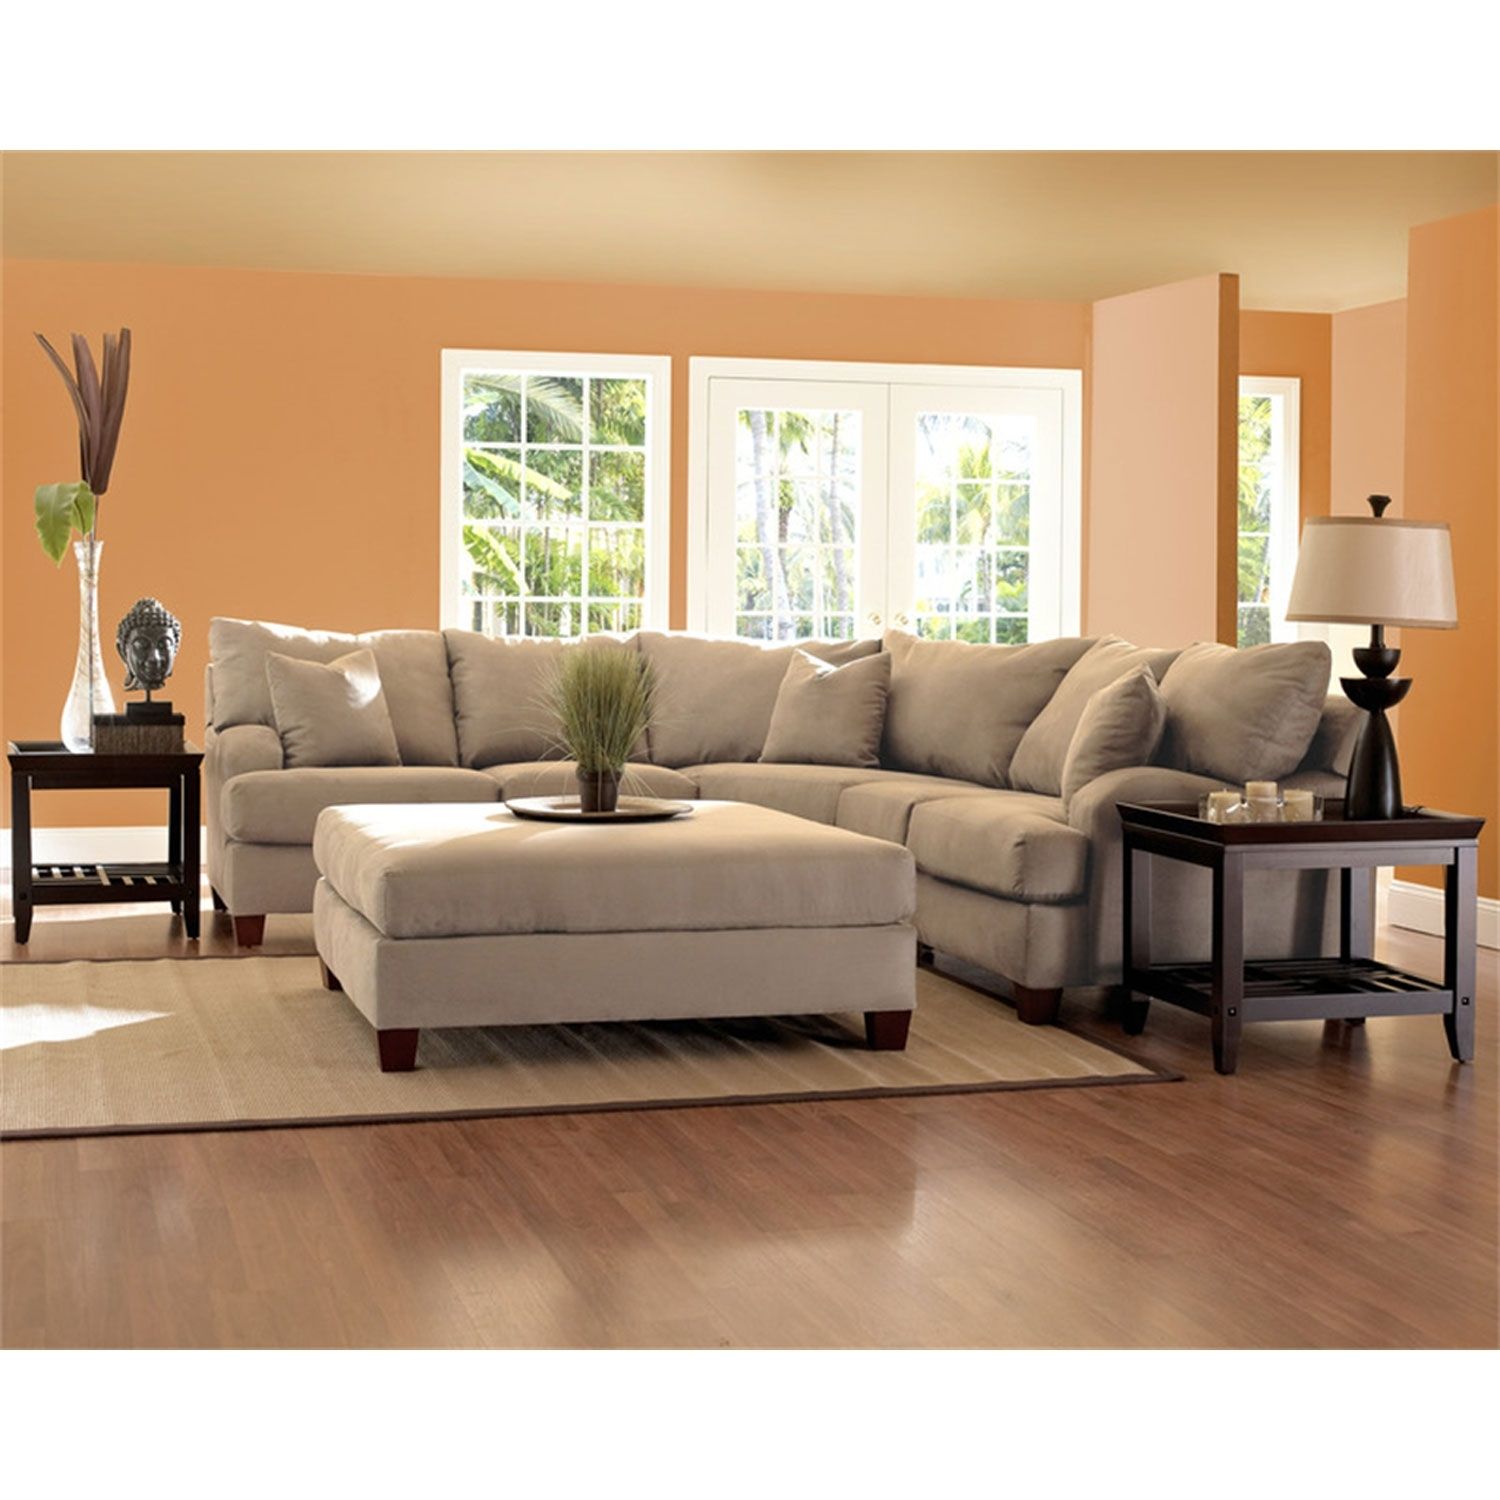 Canyon Beige Sectional Sectional Sofas Sofas & Sectionals Living With Beige Sectional Sofas (View 10 of 15)